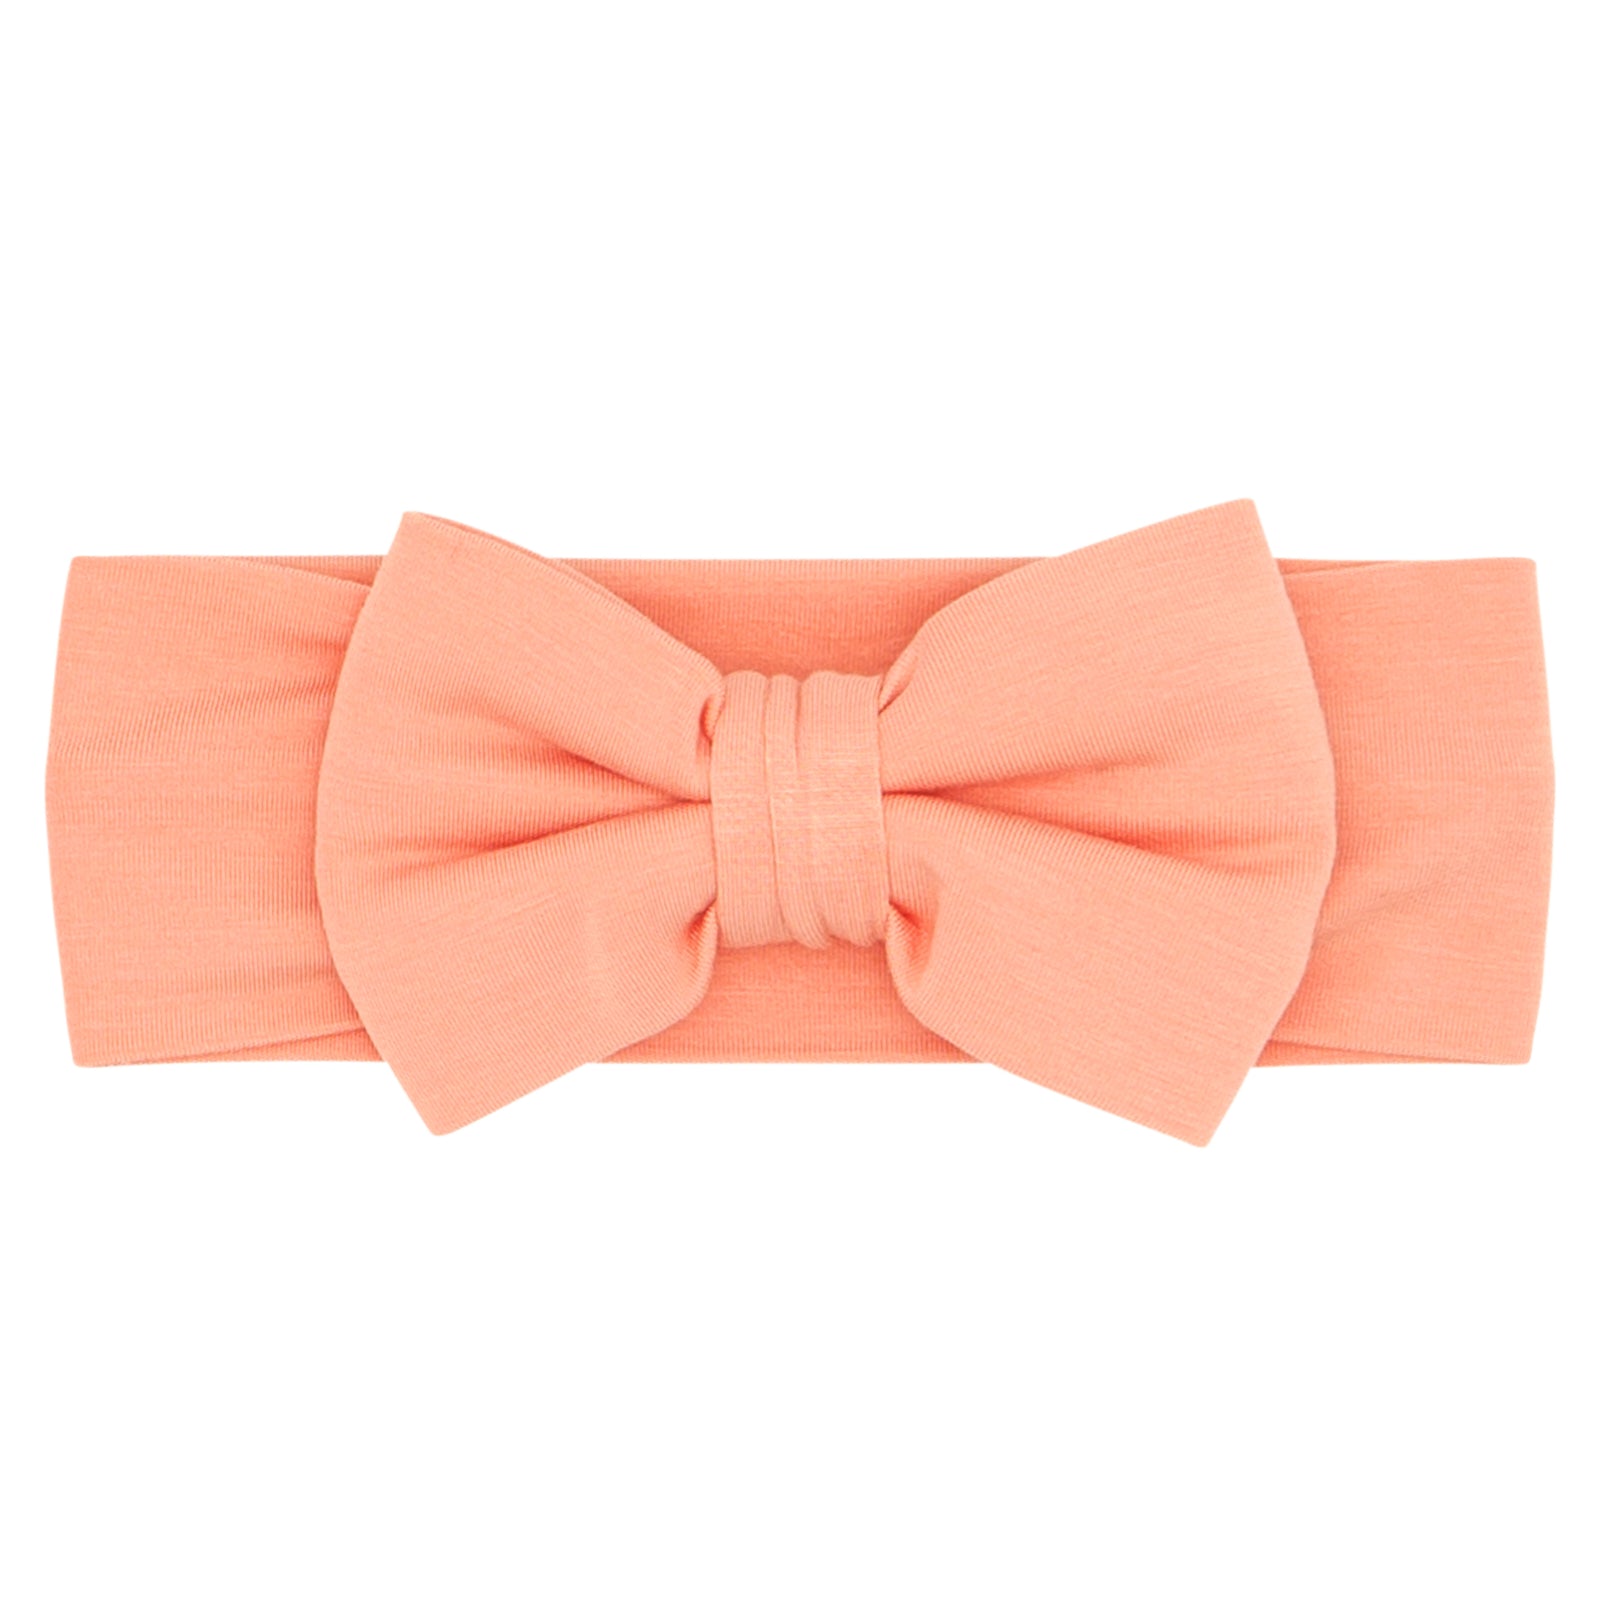 Flat lay image of a Peach Luxe Bow Headband